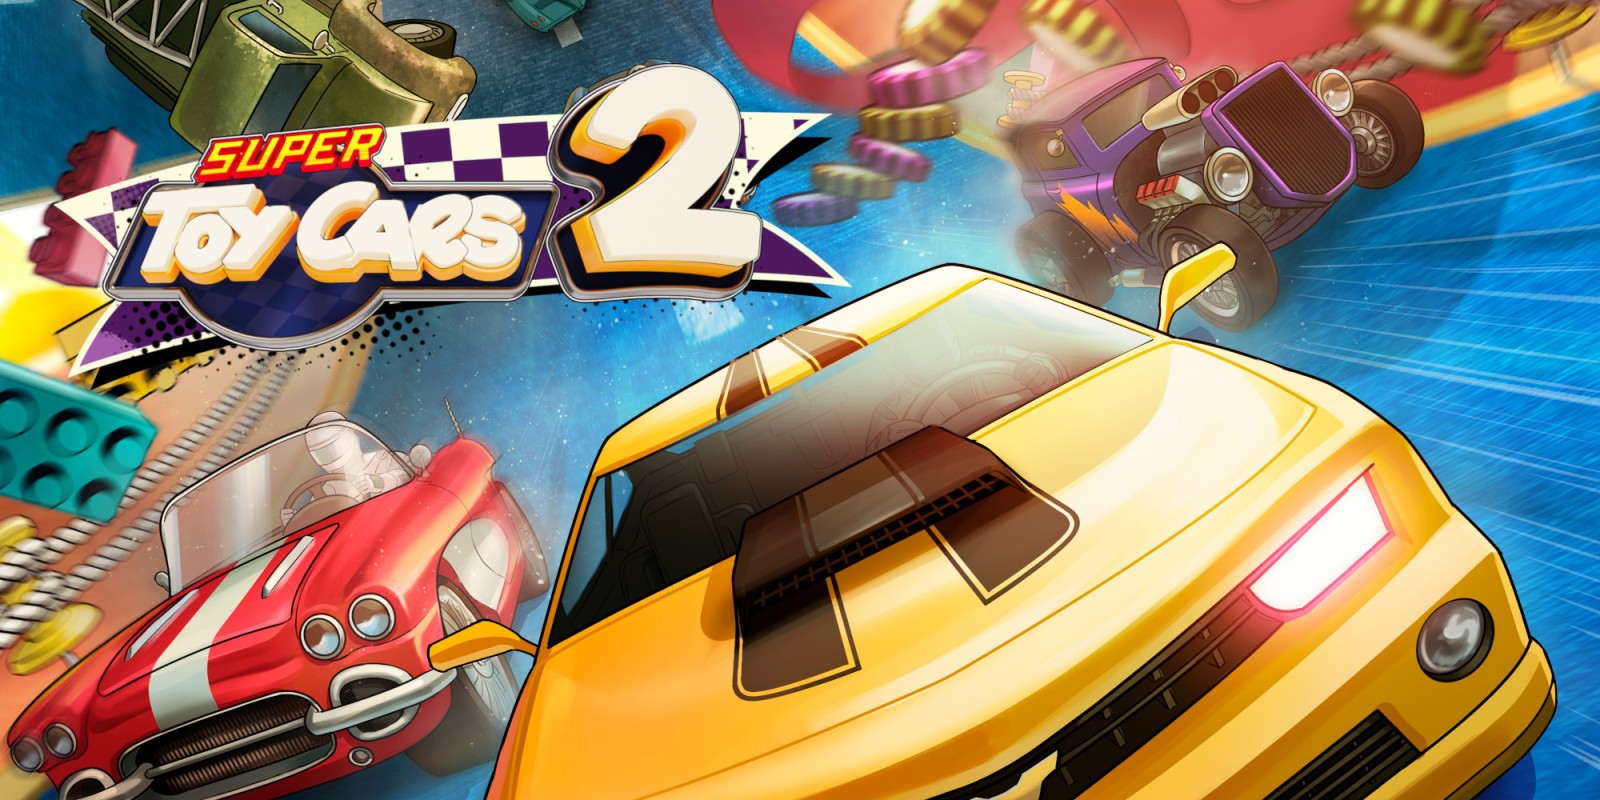 Super Toy Cars 2 | Nintendo Switch download software | Games | Nintendo